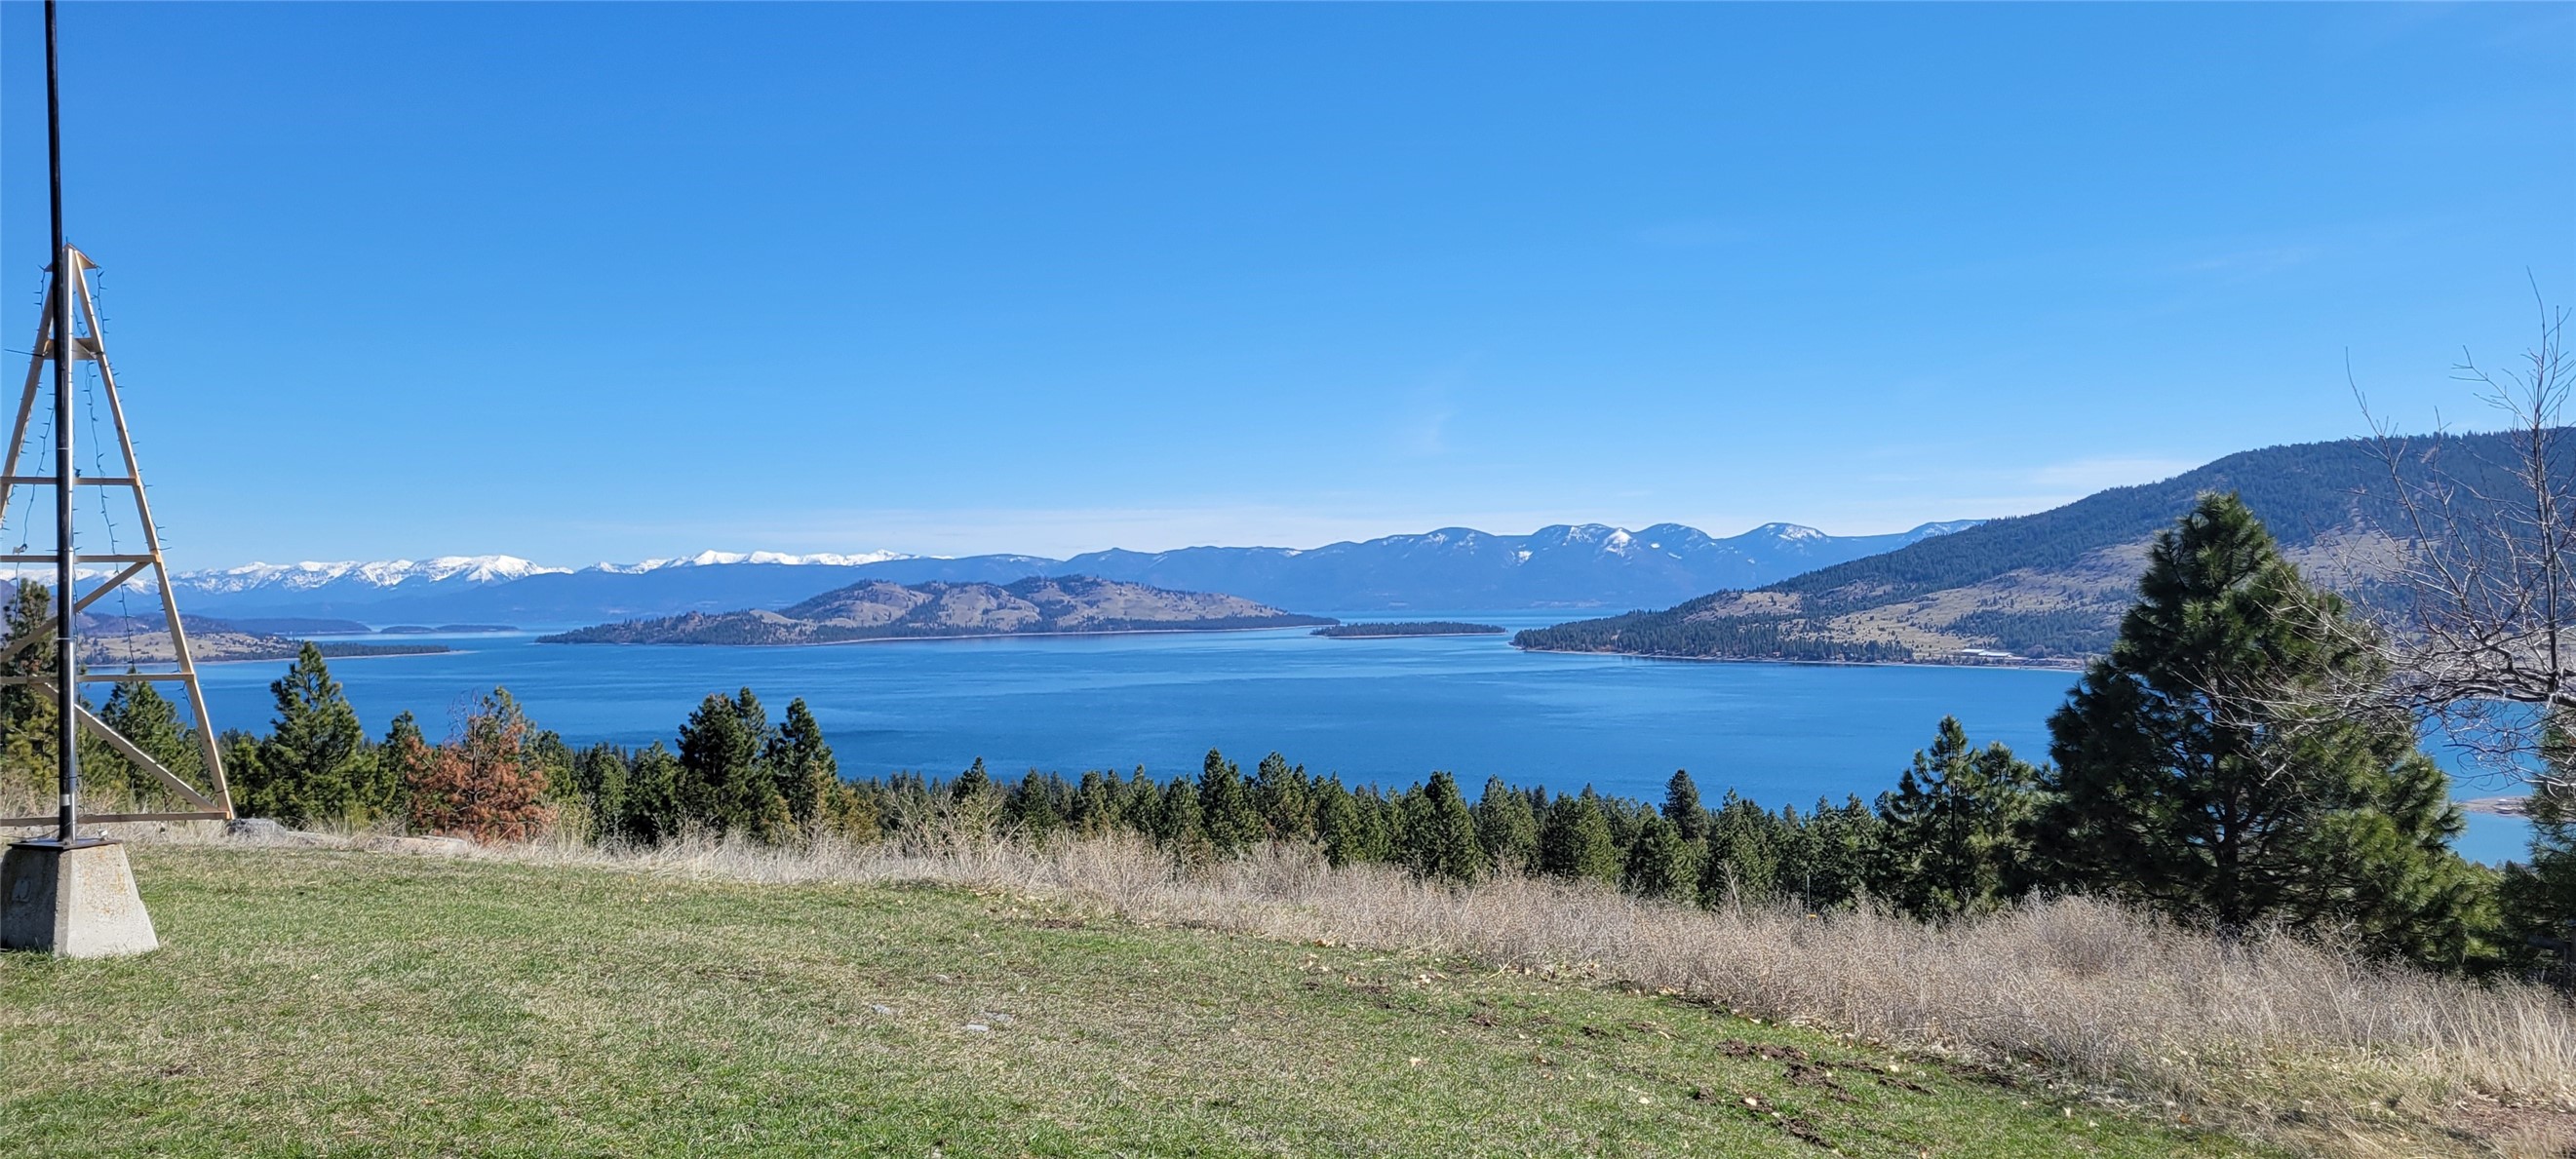 Impressive Million $$ views to Flathead Lake, Wild Horse Island and the mountains! Gently sloping 5 acres, a 2 bedroom 2 bath home of 1280 sq ft.  Main house : wood floors, galley kitchen, dining room, propane stove and a view deck. The property has a 40 X 28  garage/shop with a 3/4 bath, propane heat, electric (metered separate from the house). Keep the apartment above the shop area, recreate as quest house. Shared well with neighbor.  Beautiful place to re create. CCR's historically have been ignored, however several new owners having purchased in the subdivision are interested in governance and the properties conforming. Much information regarding the one bedroom septic permit to be discussed with buyer and seller agents. The CCR's for Early Dawn Estates are provided in the documents tab. The home to be shown by appointment only. The listing information has been collected from out side public and private sources. It is not guaranteed by the listing office or listing agent. Listing office and listing agent make no warranties as to accuracy of information. All interested parties to investigate property to their satisfaction.